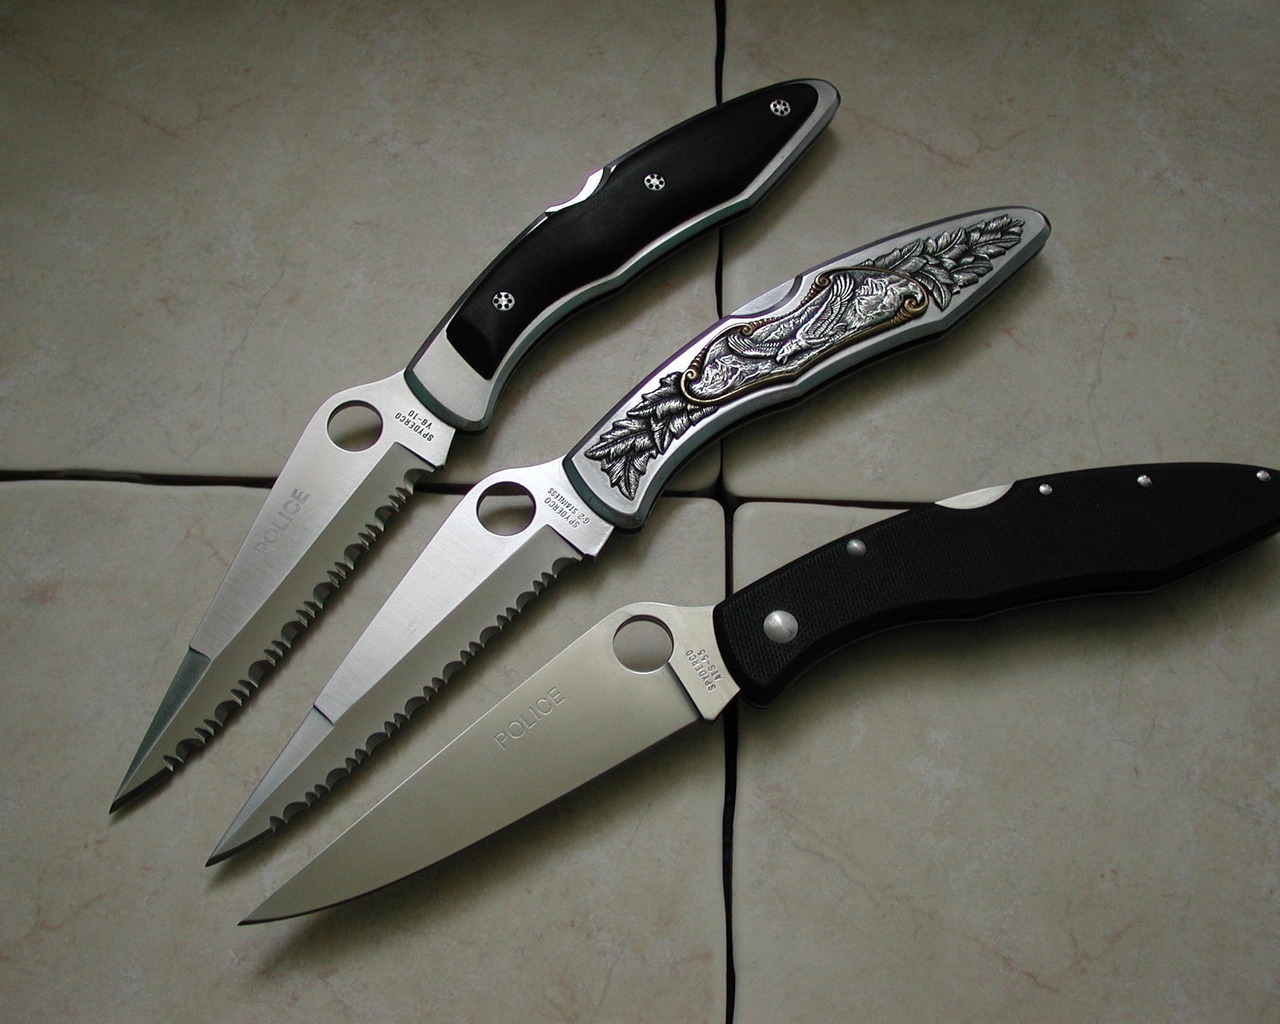 Knives for 1280 x 1024 resolution